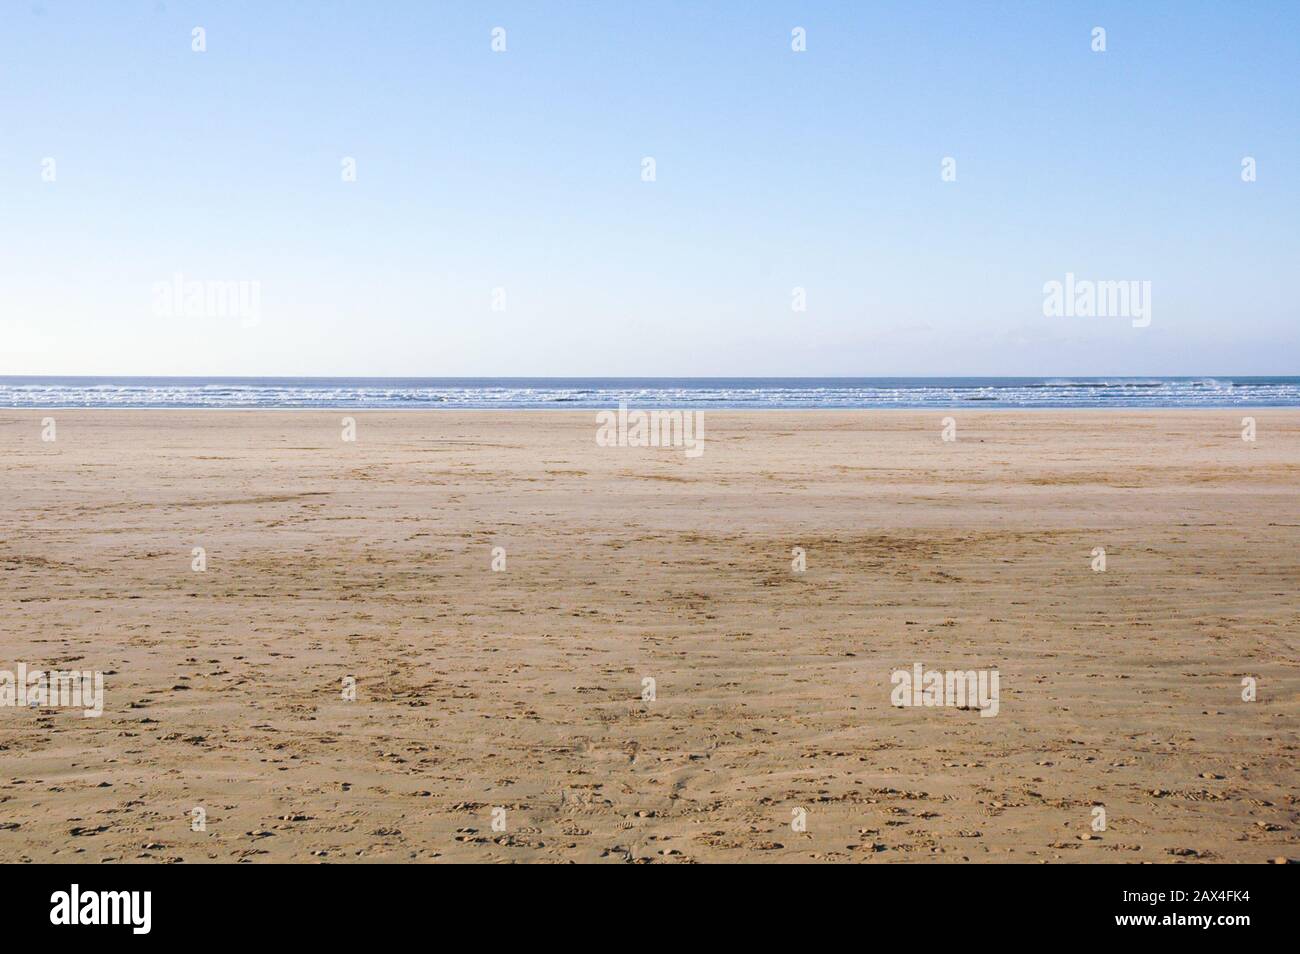 Large empty sandy beach with golden sand leading to the ocean Stock Photo